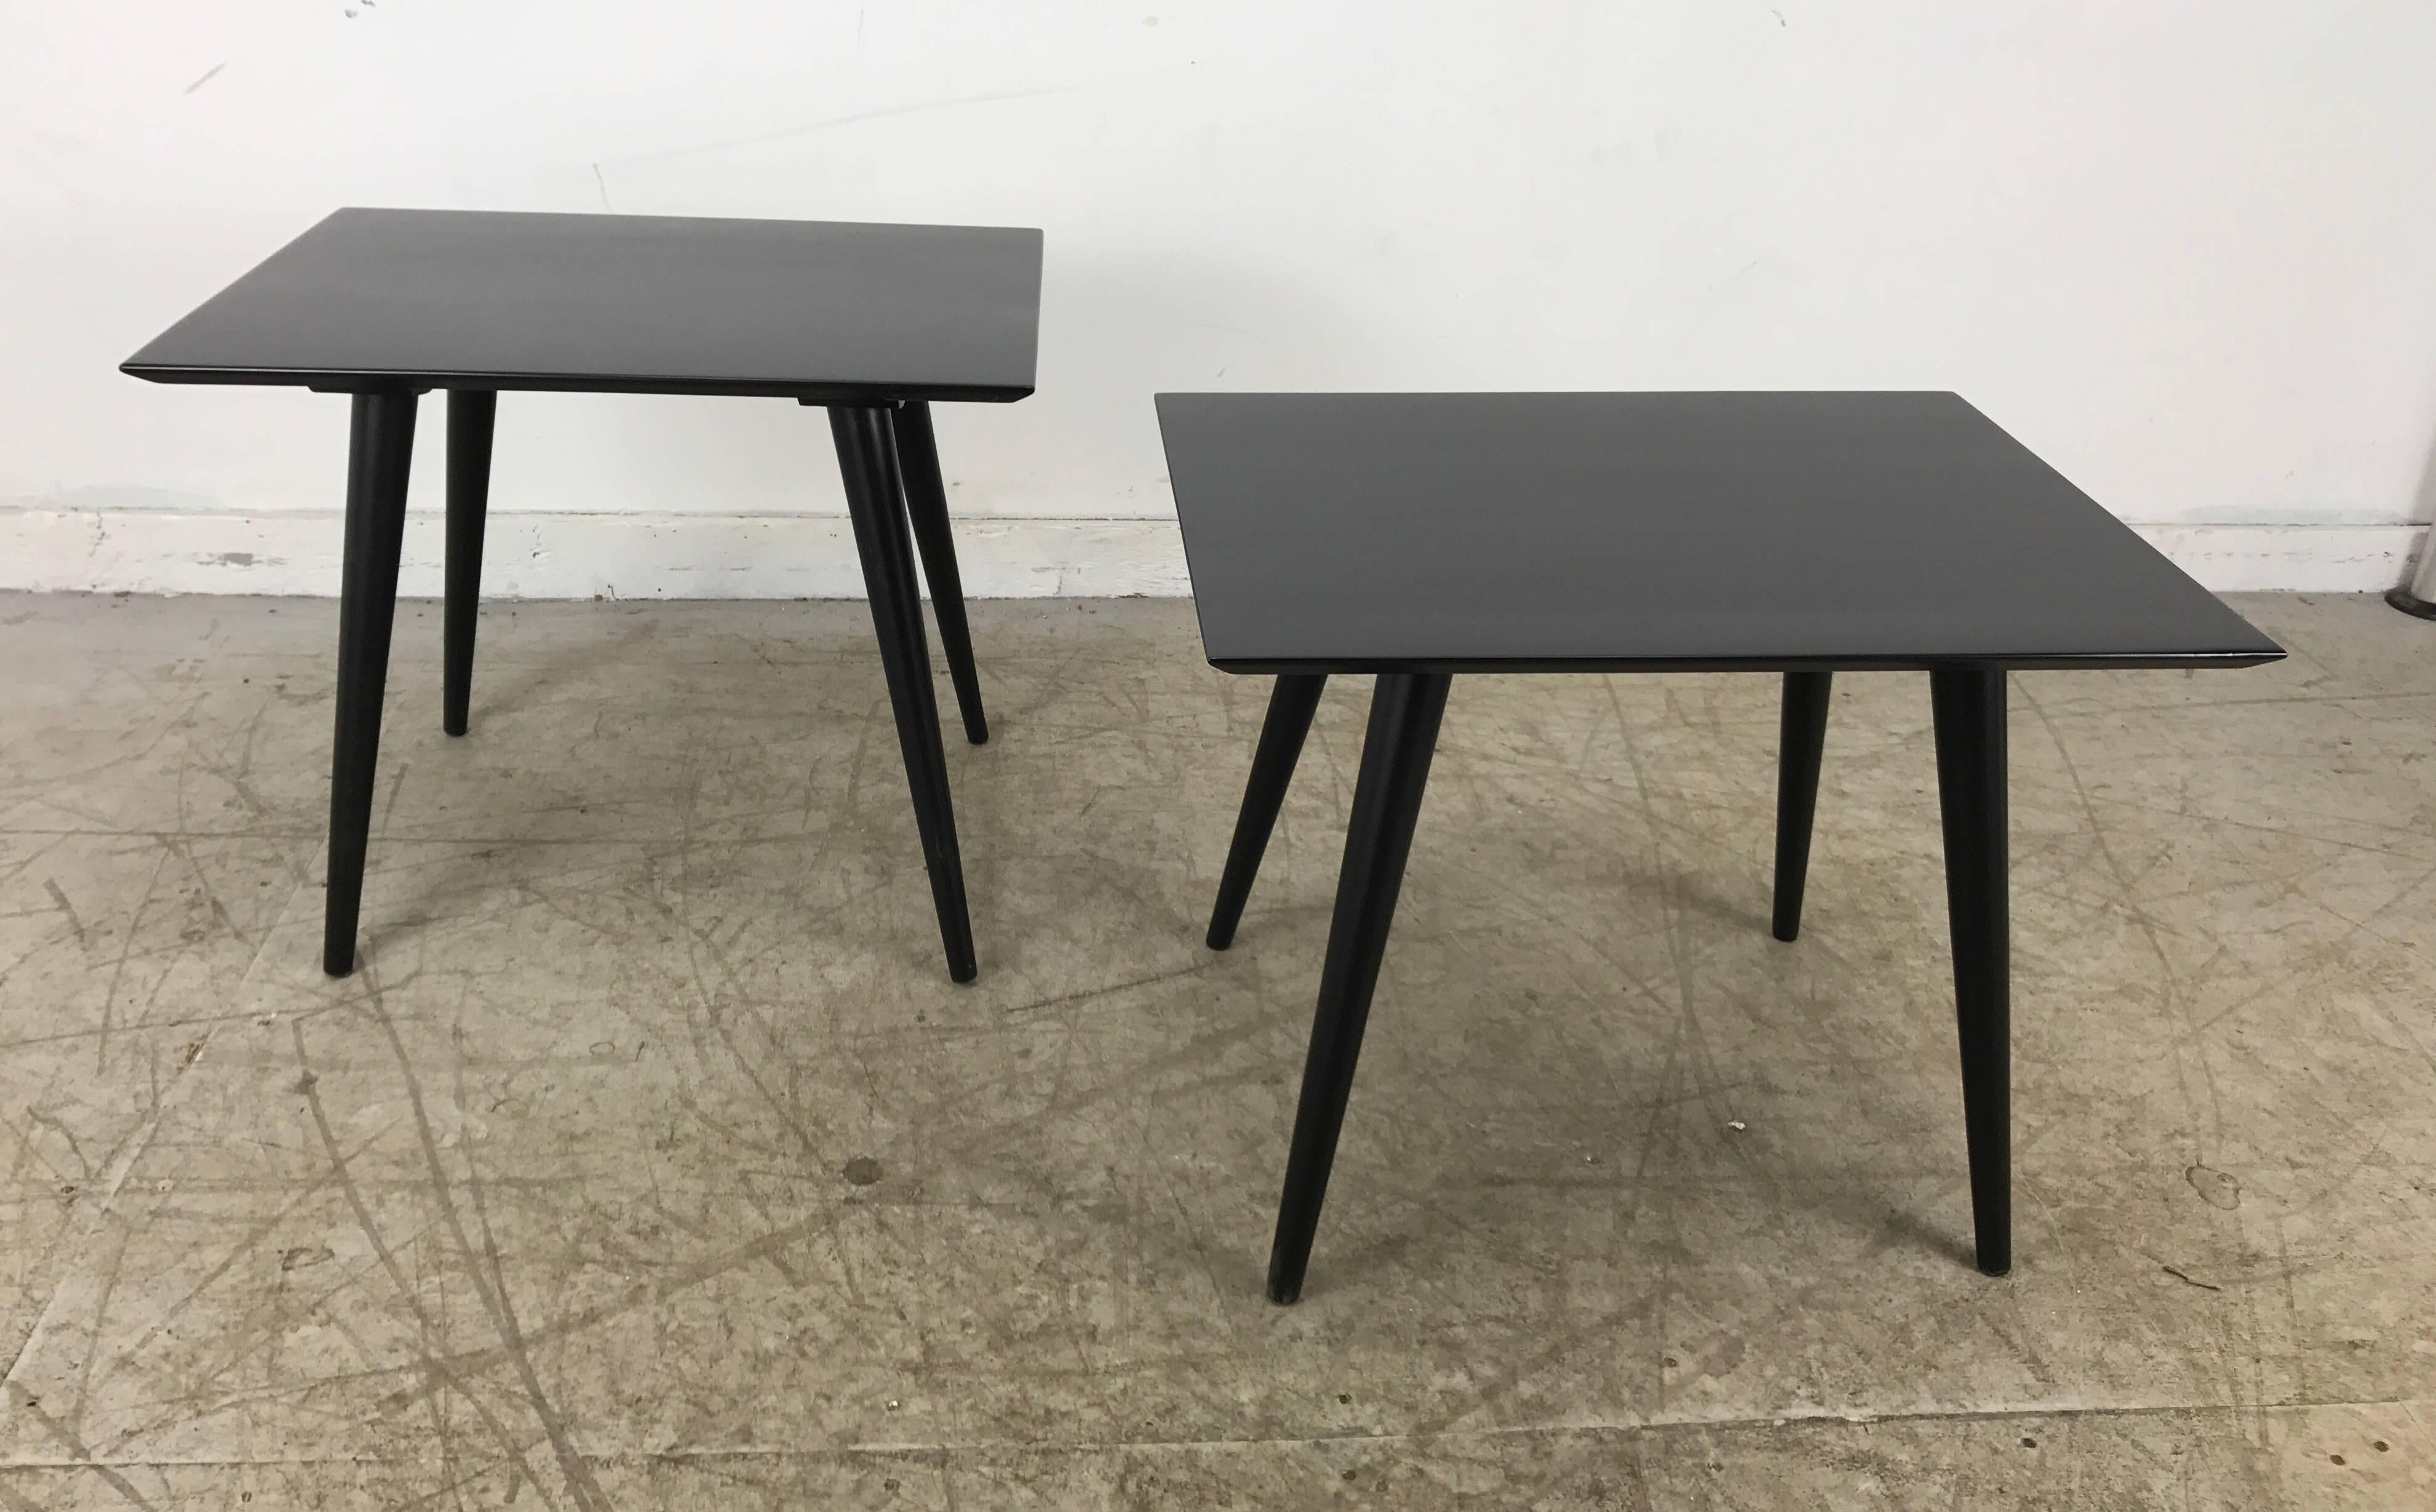 Classic Mid-Century Modern Planner Group end tables designed by Paul McCobb, recently restored, stunning black lacquer finish. I believe these to be 1st year production, early Paul McCobb label, possibly custom ordered since there is a 1 inch height